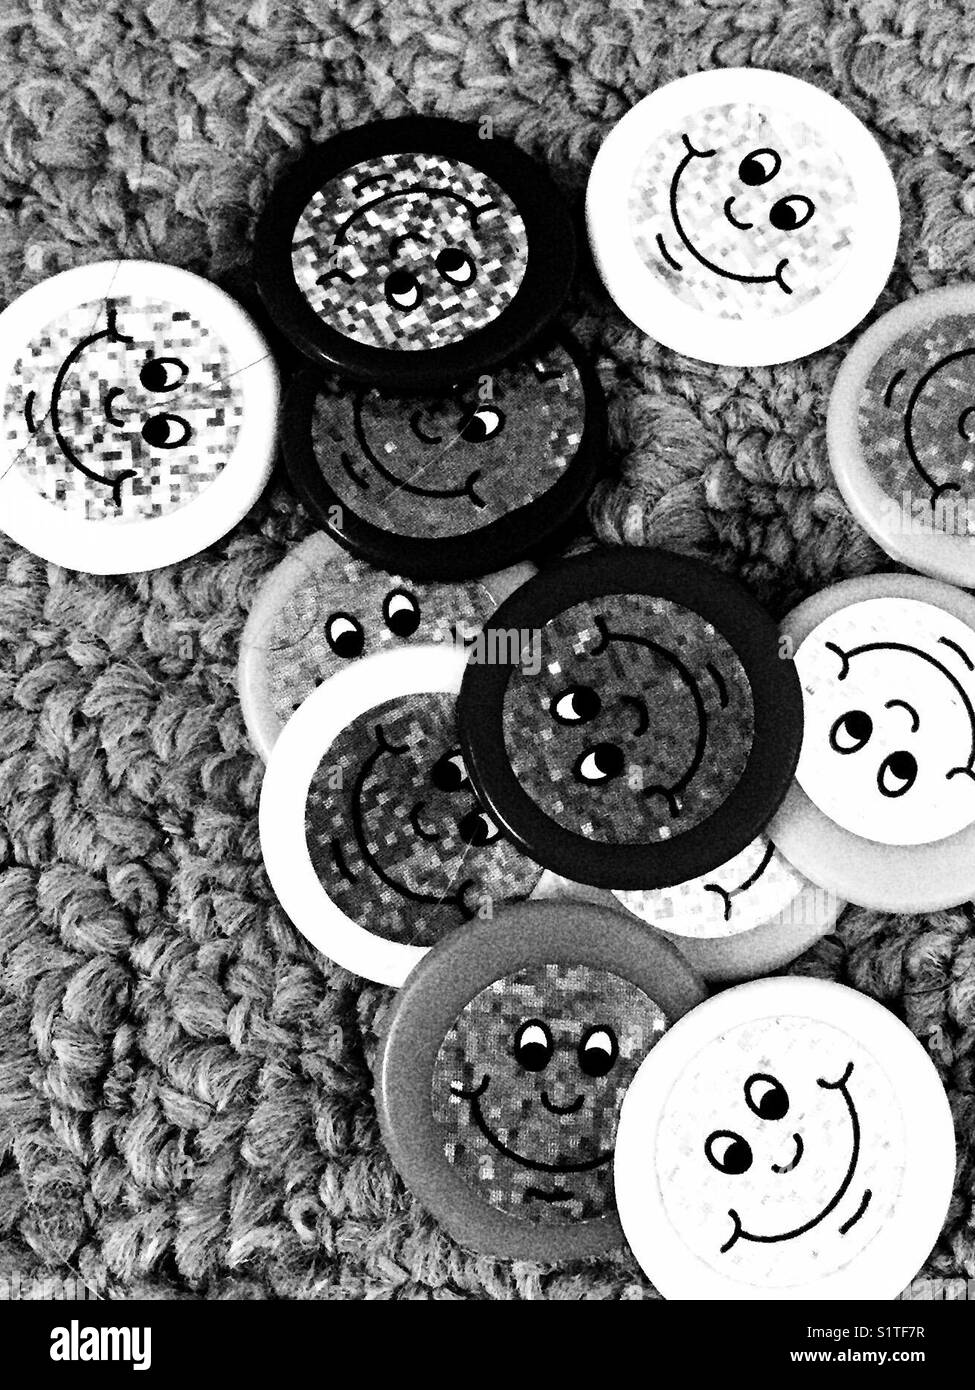 Smiley face counters on carpet Stock Photo